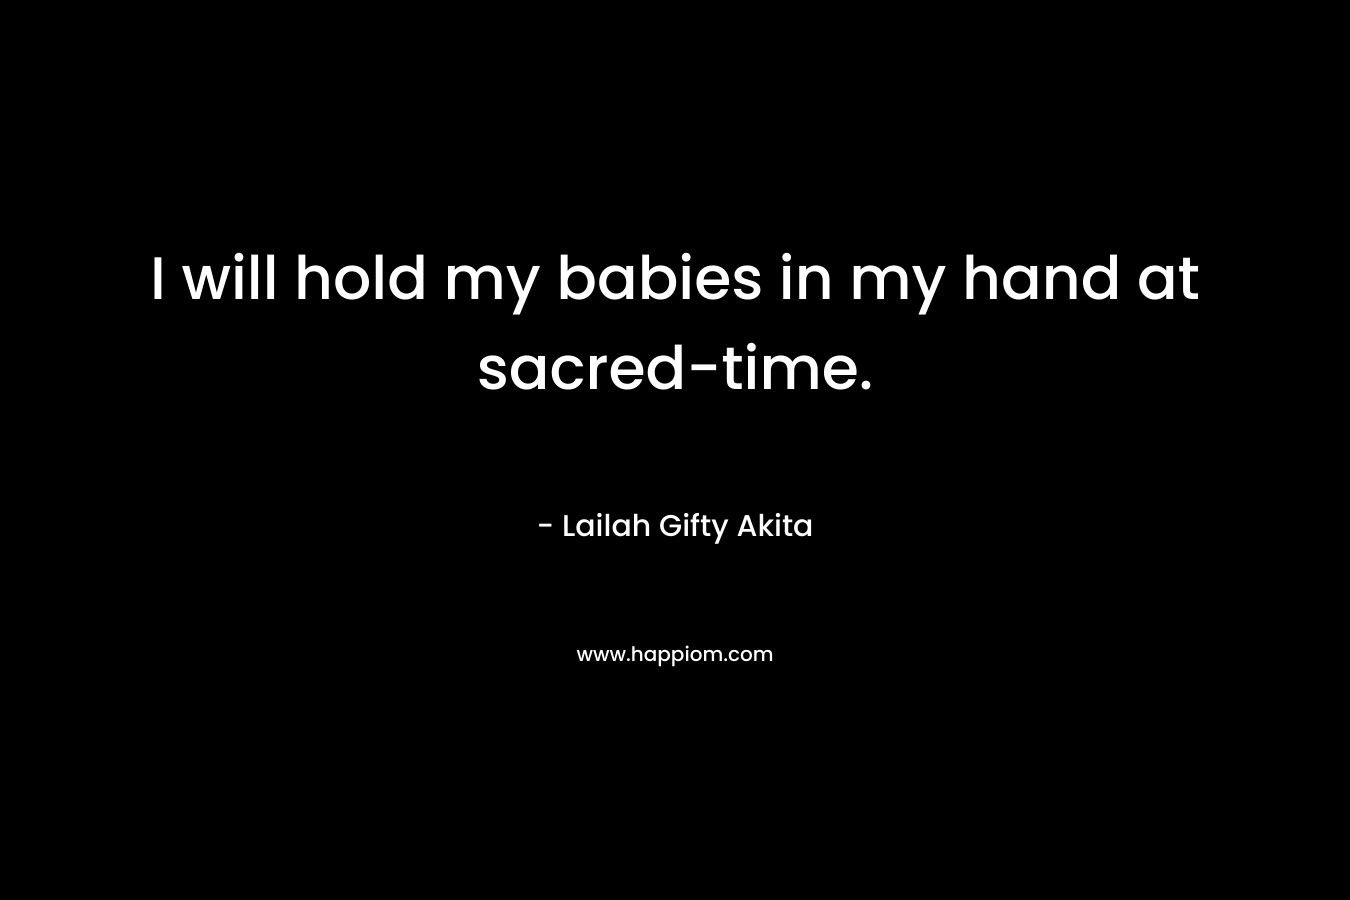 I will hold my babies in my hand at sacred-time.